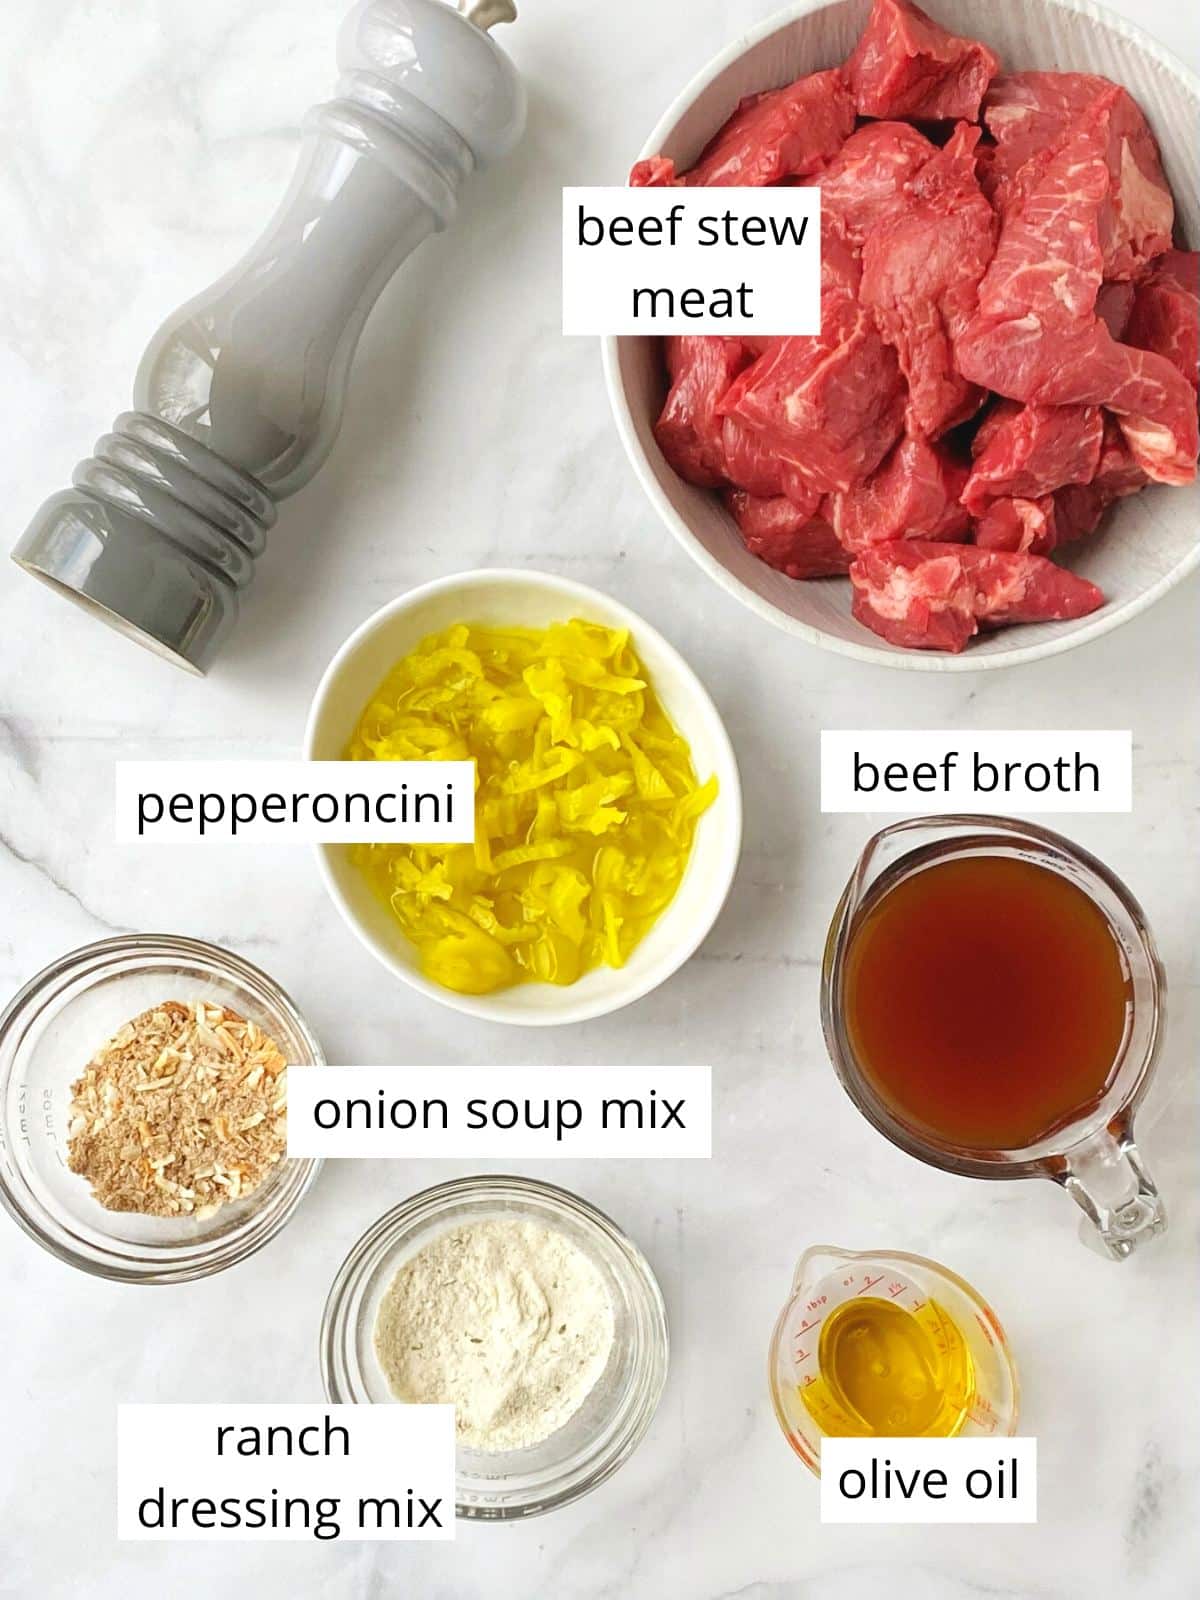 ingredients for mississippi beef.